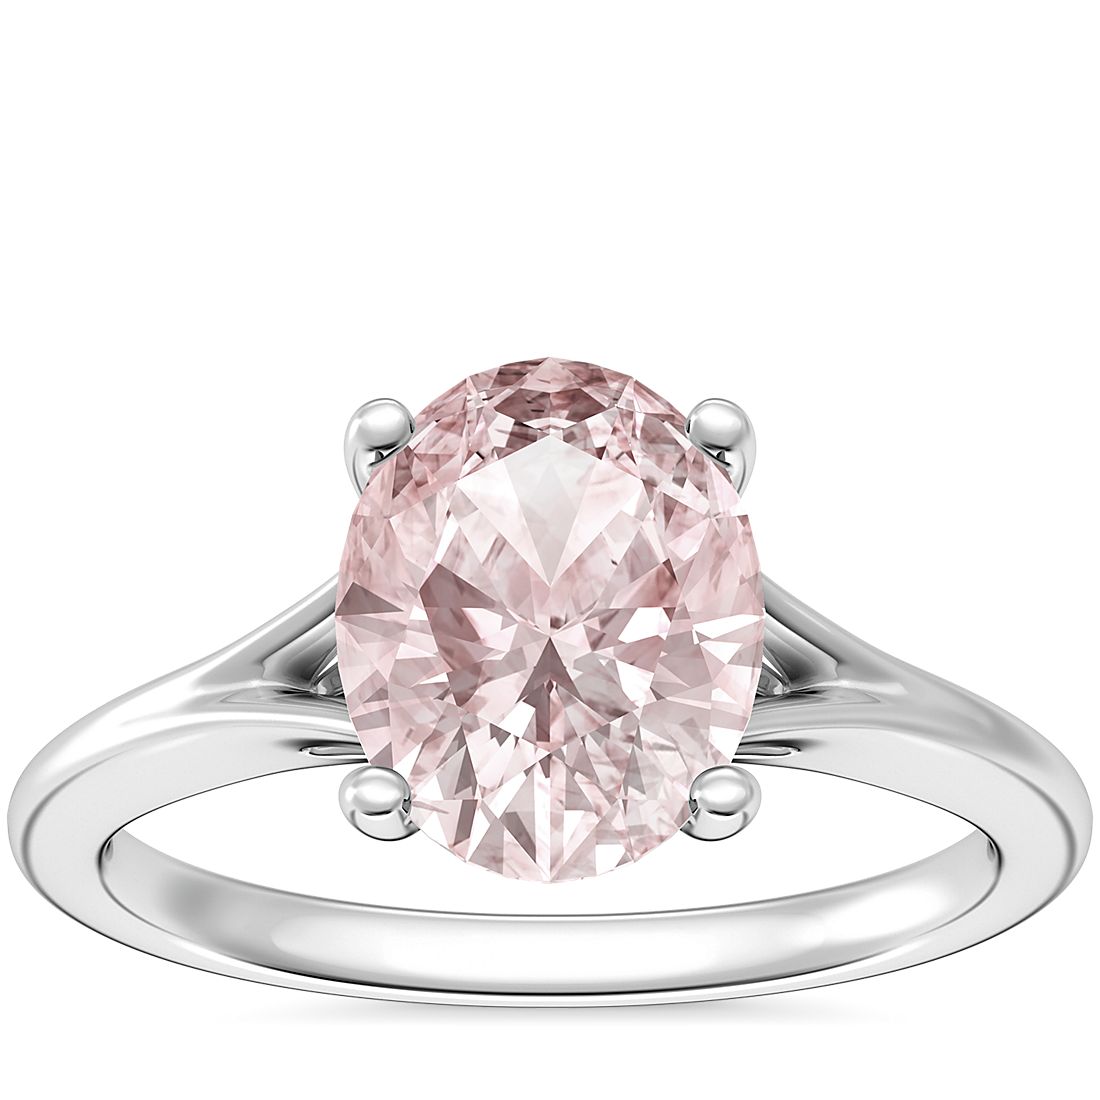 Petite Split Shank Solitaire Engagement Ring with Oval Morganite in Platinum (9x7mm)